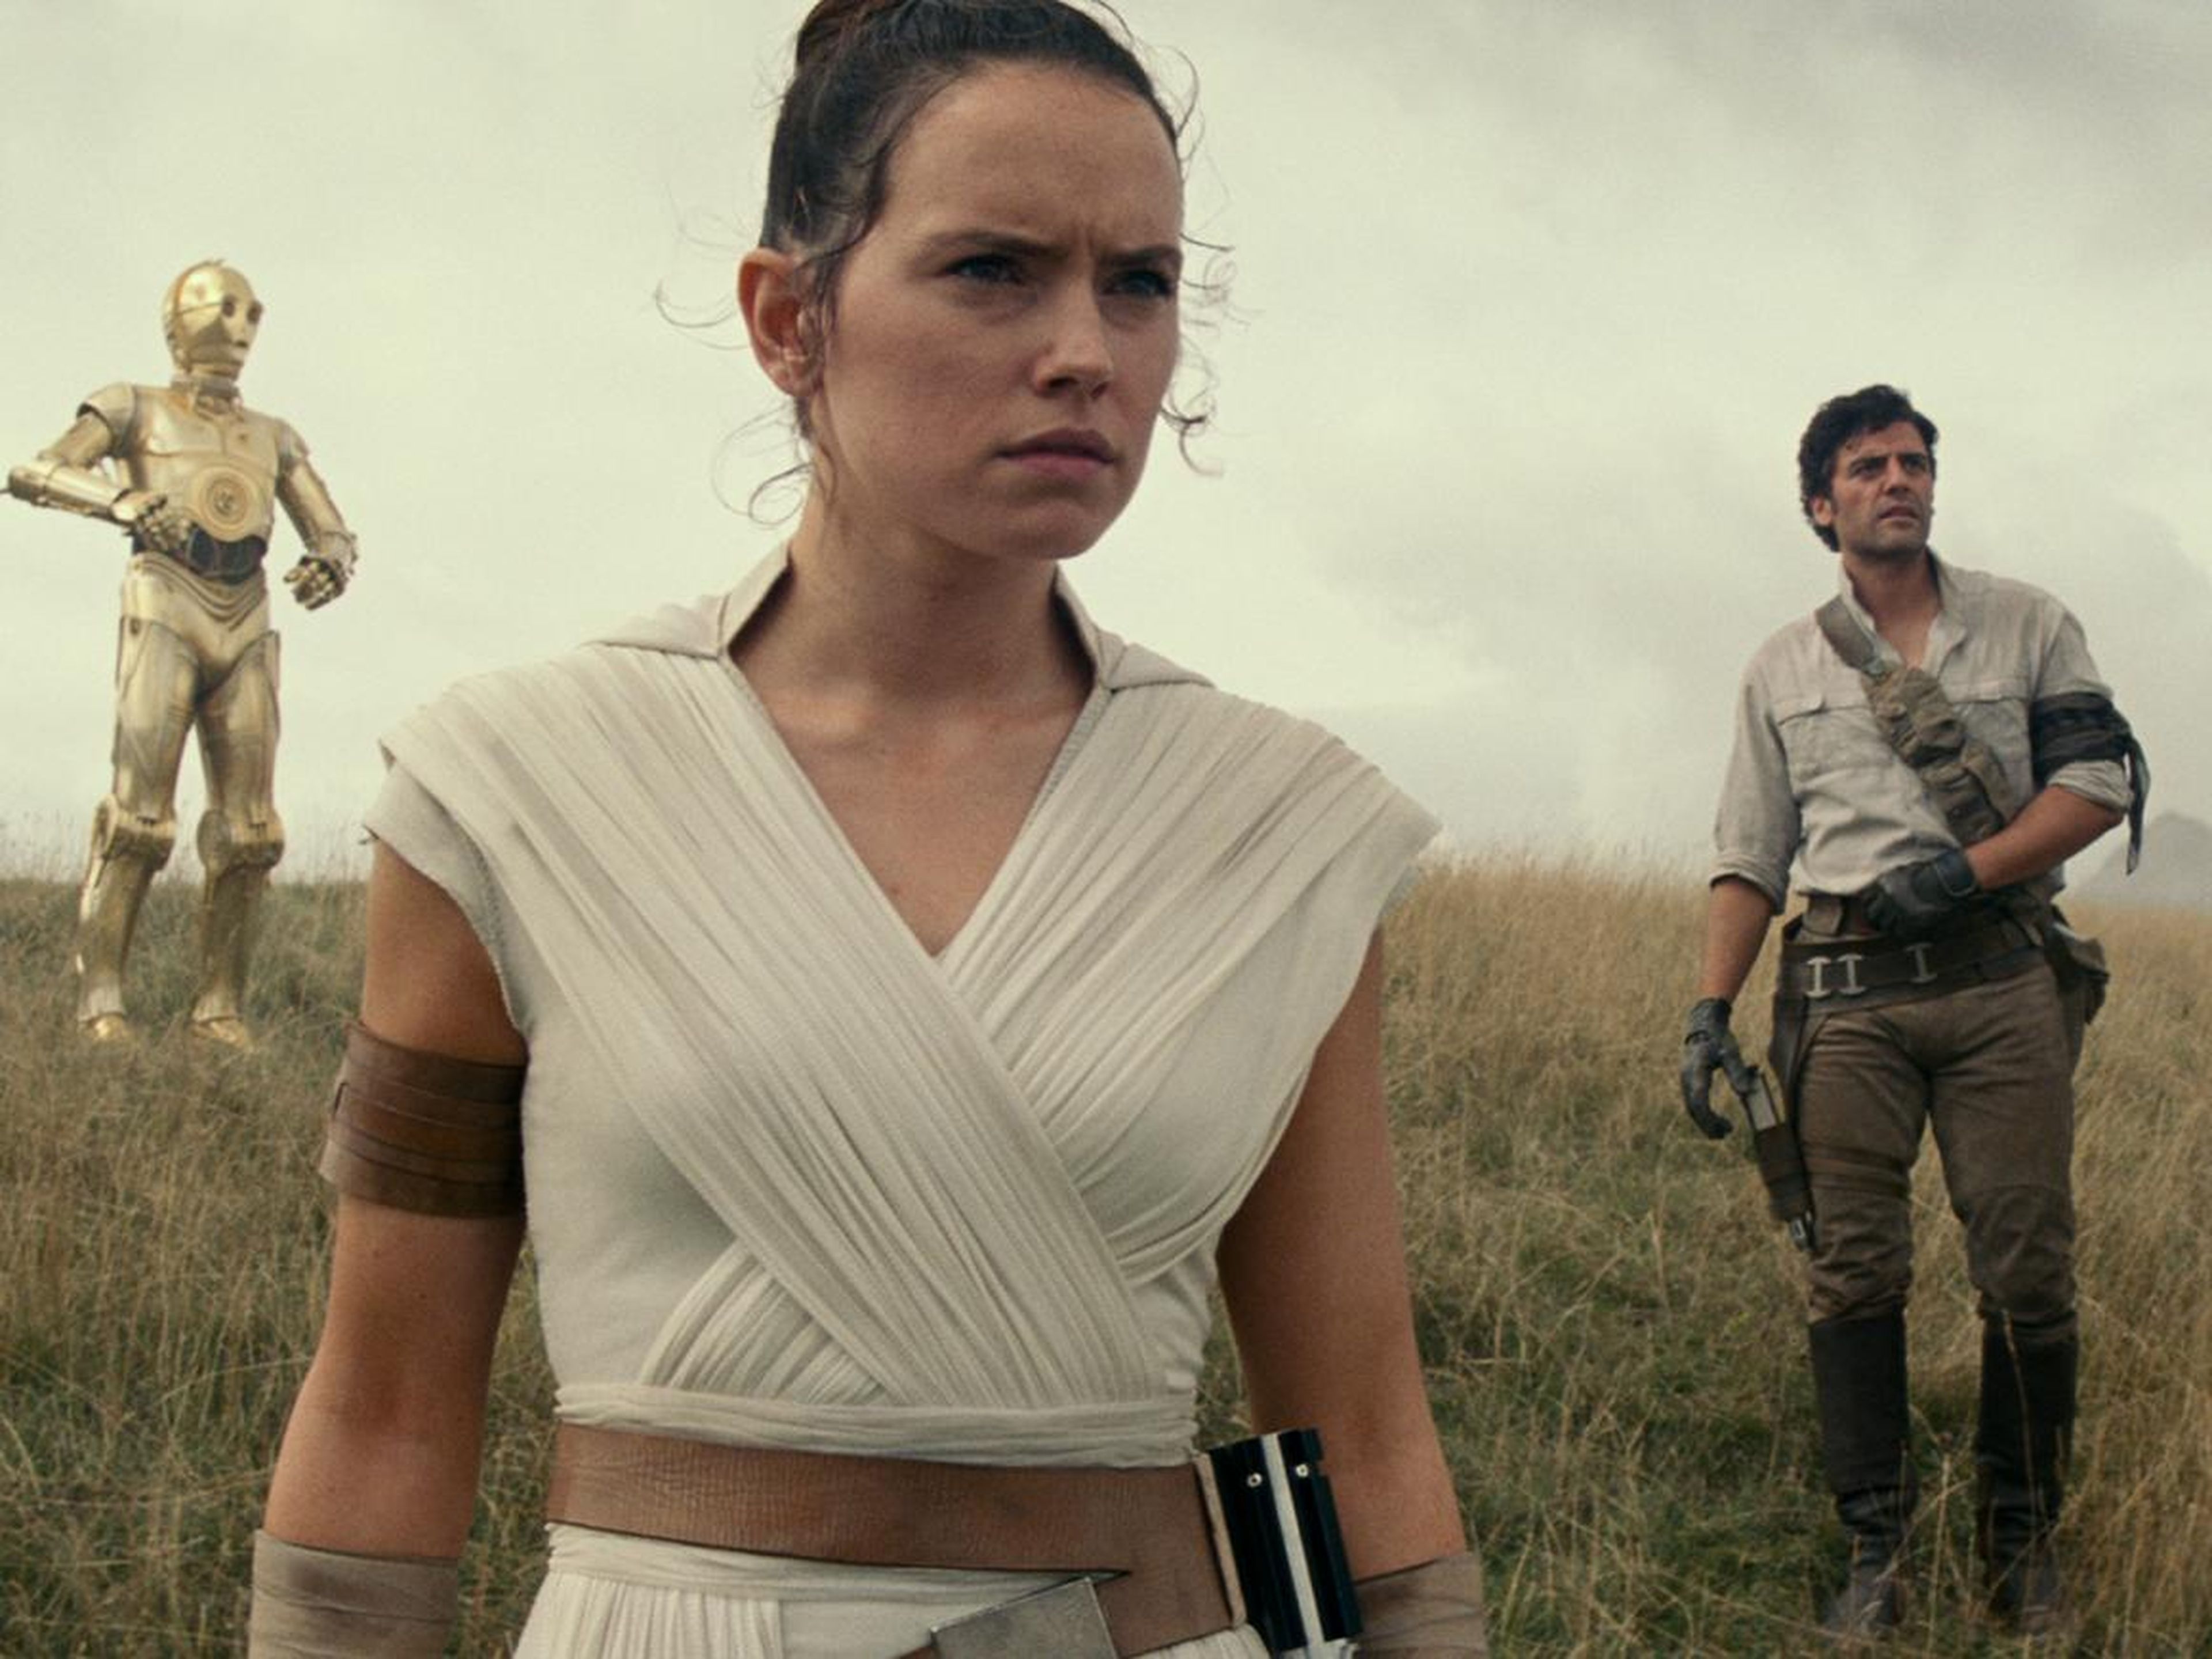 Daisy Ridley and Oscar Isaac in "Star Wars: The Rise of Skywalker."